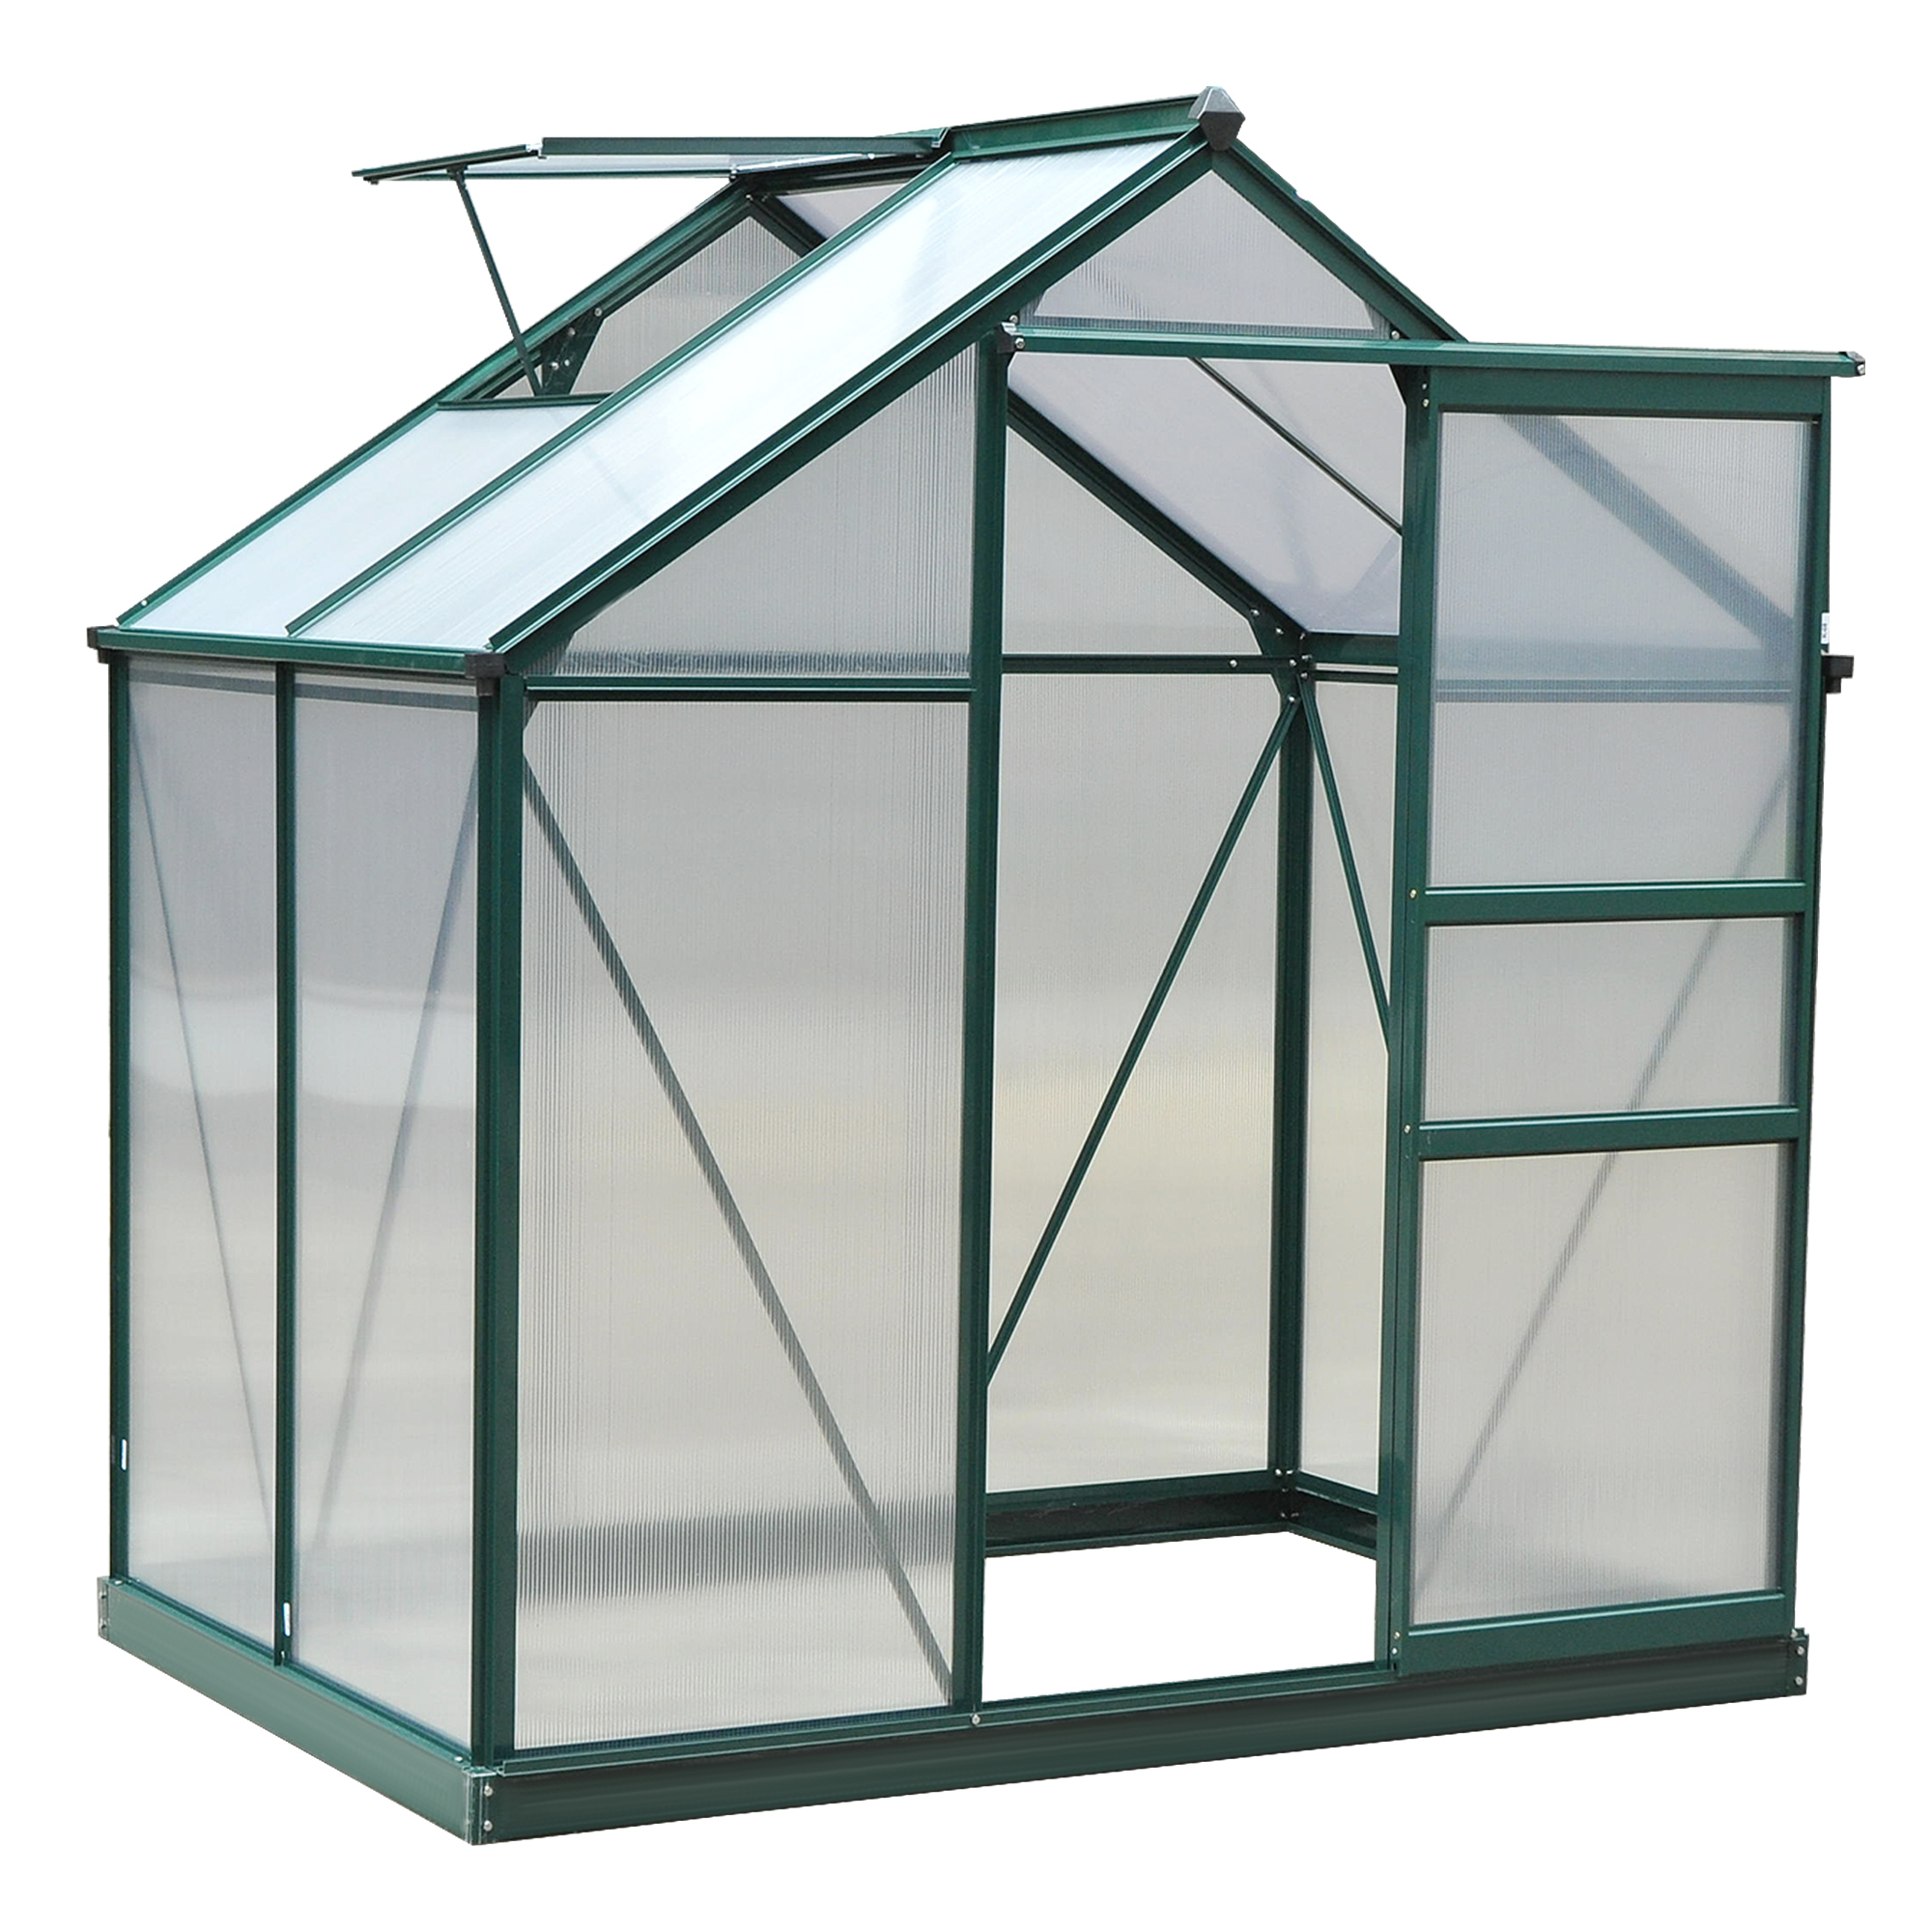 Outsunny 6.2' x 4.3' x 6.6' Clear Polycarbonate Greenhouse Large Walk-In Green  House Garden Plants Grow Galvanized Base Aluminium Frame w/ Slide Door 